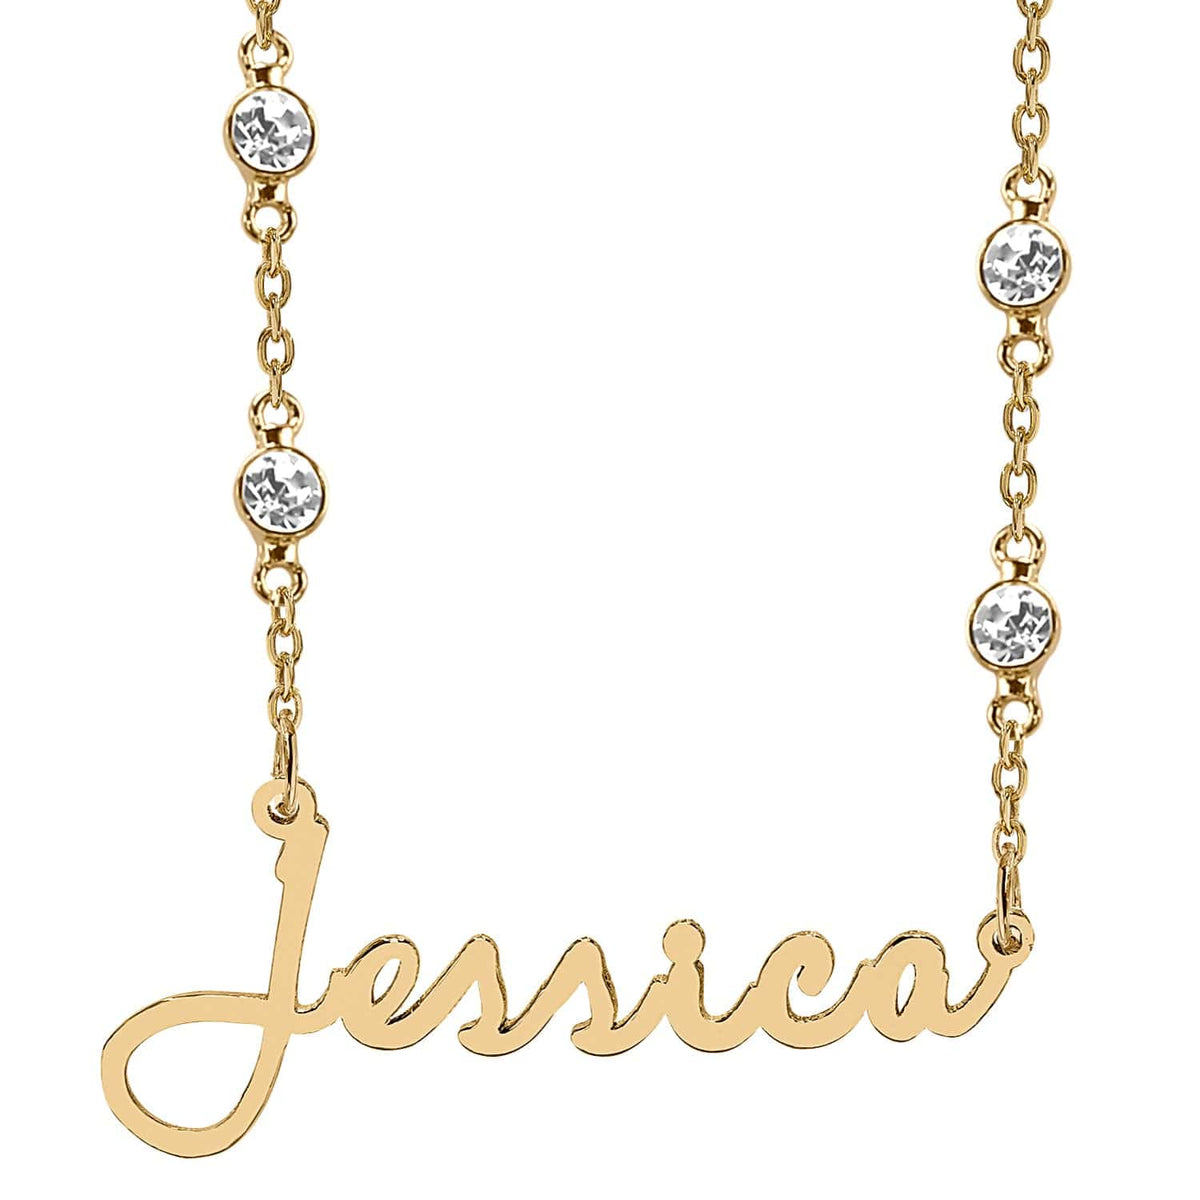 1 Name Pendant / Gold Plated / Zirconia Chain Script Name Necklace